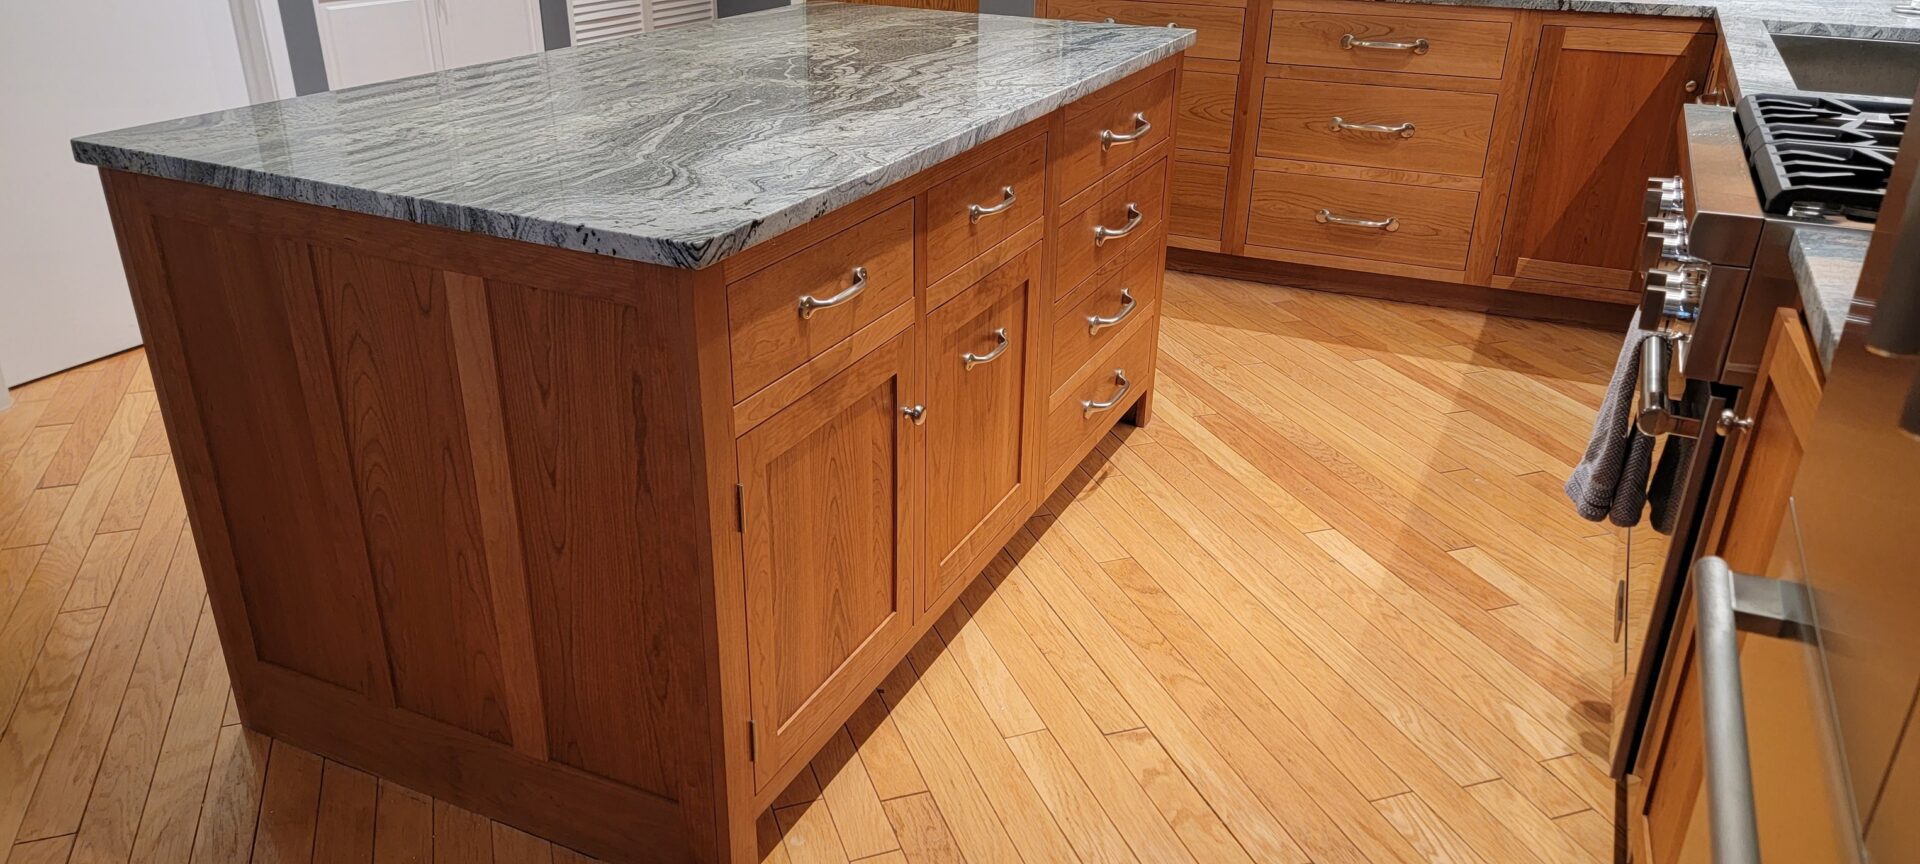 A kitchen with Cherry cabinets and granite counter tops.